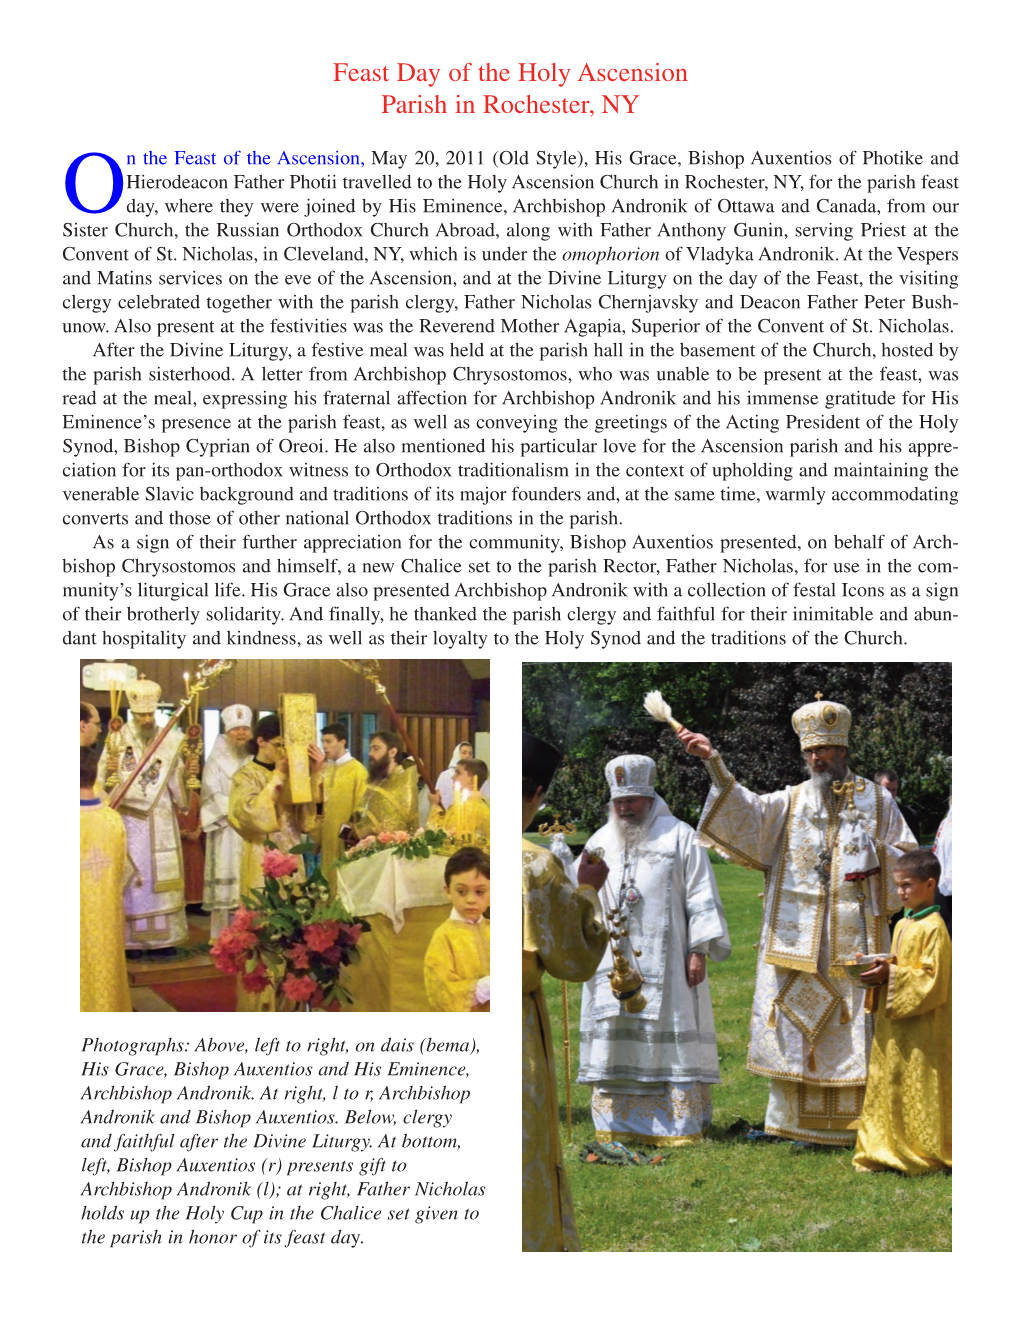 Feast Day of the Holy Ascension Parish in Rochester, New York